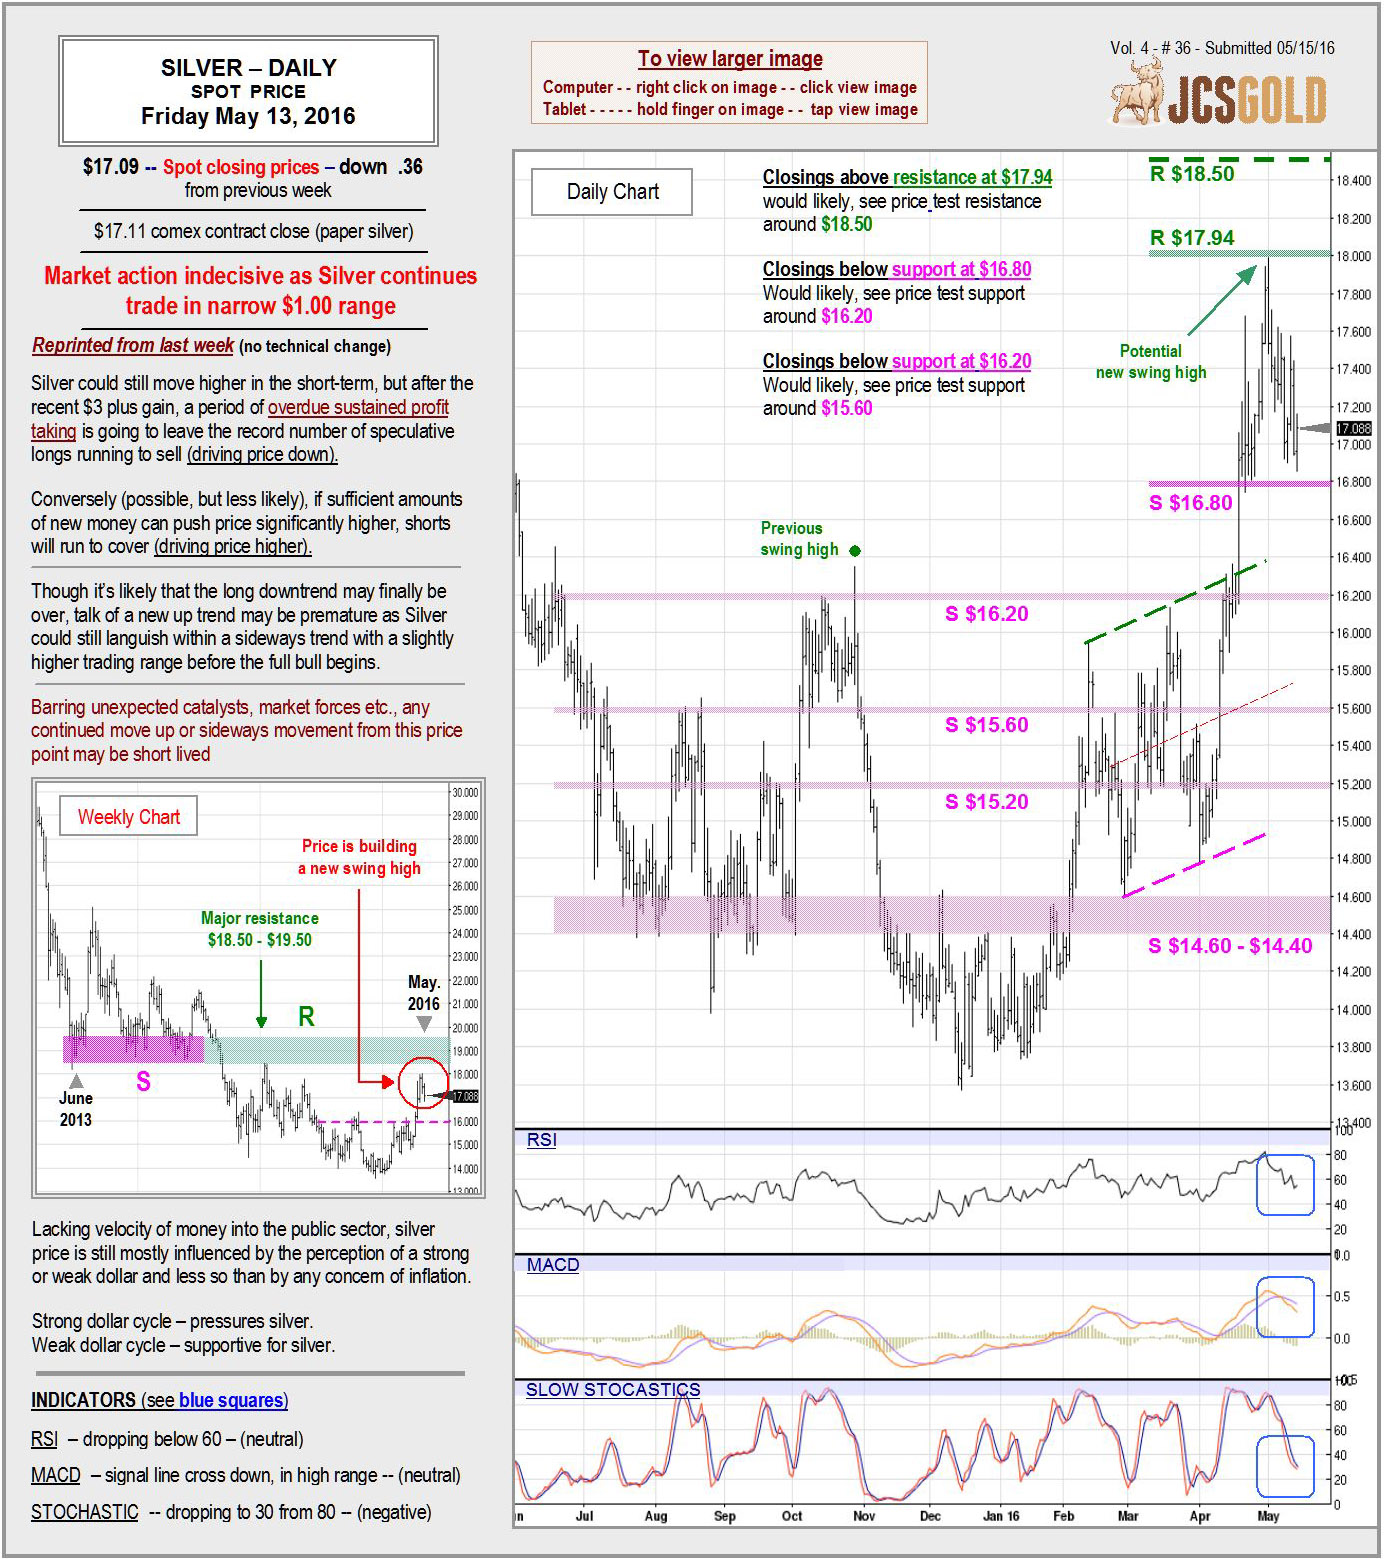 May 13, 2016 chart & commentary